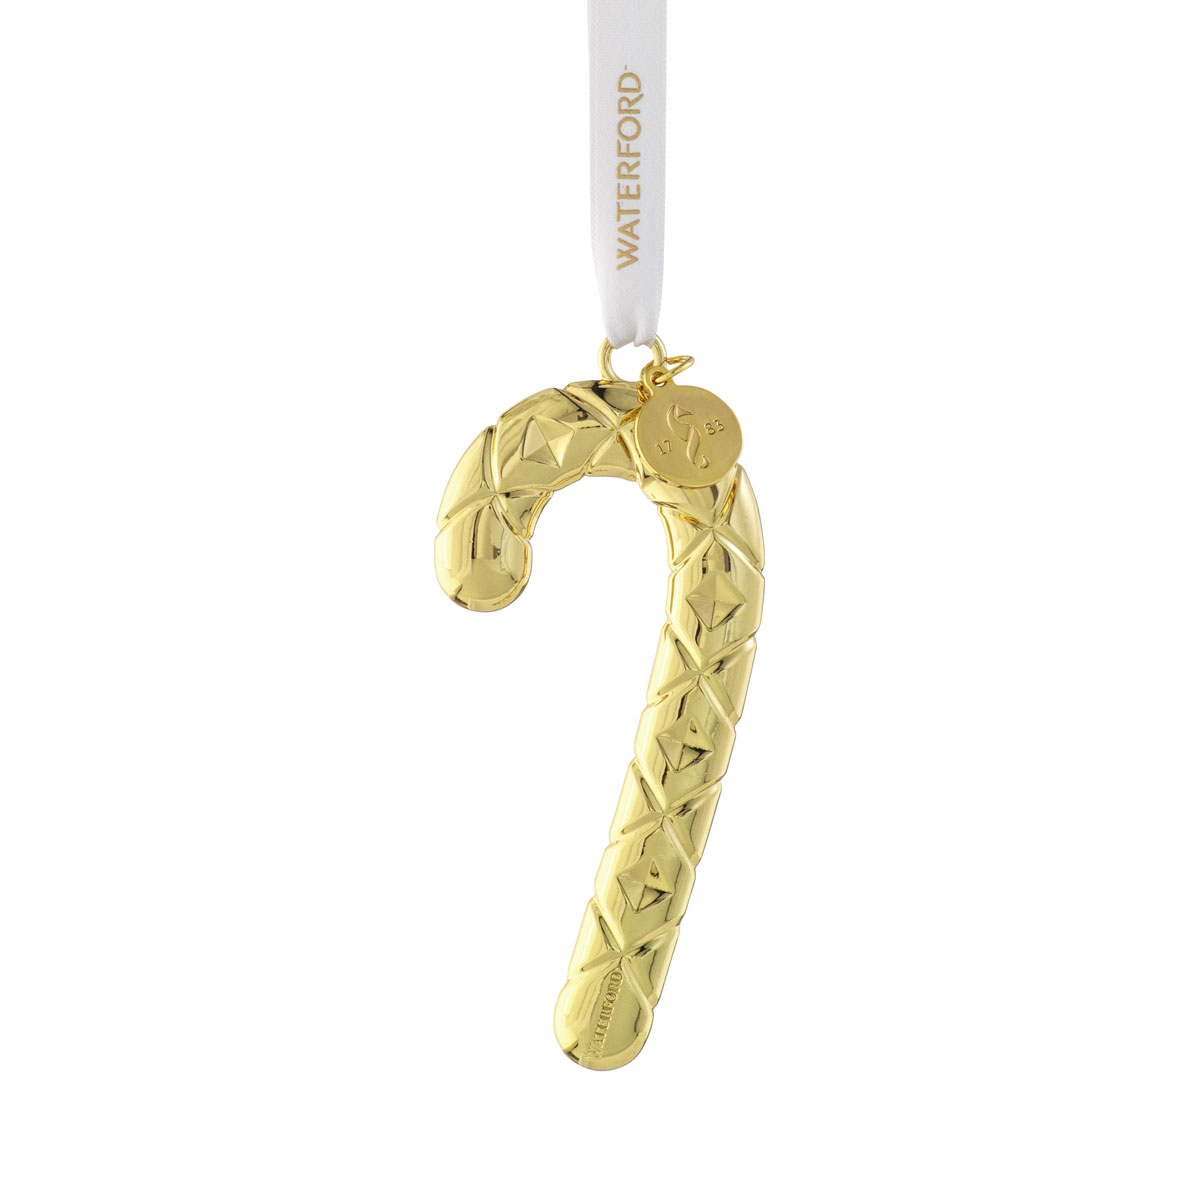 Waterford Candy Cane Golden Ornament